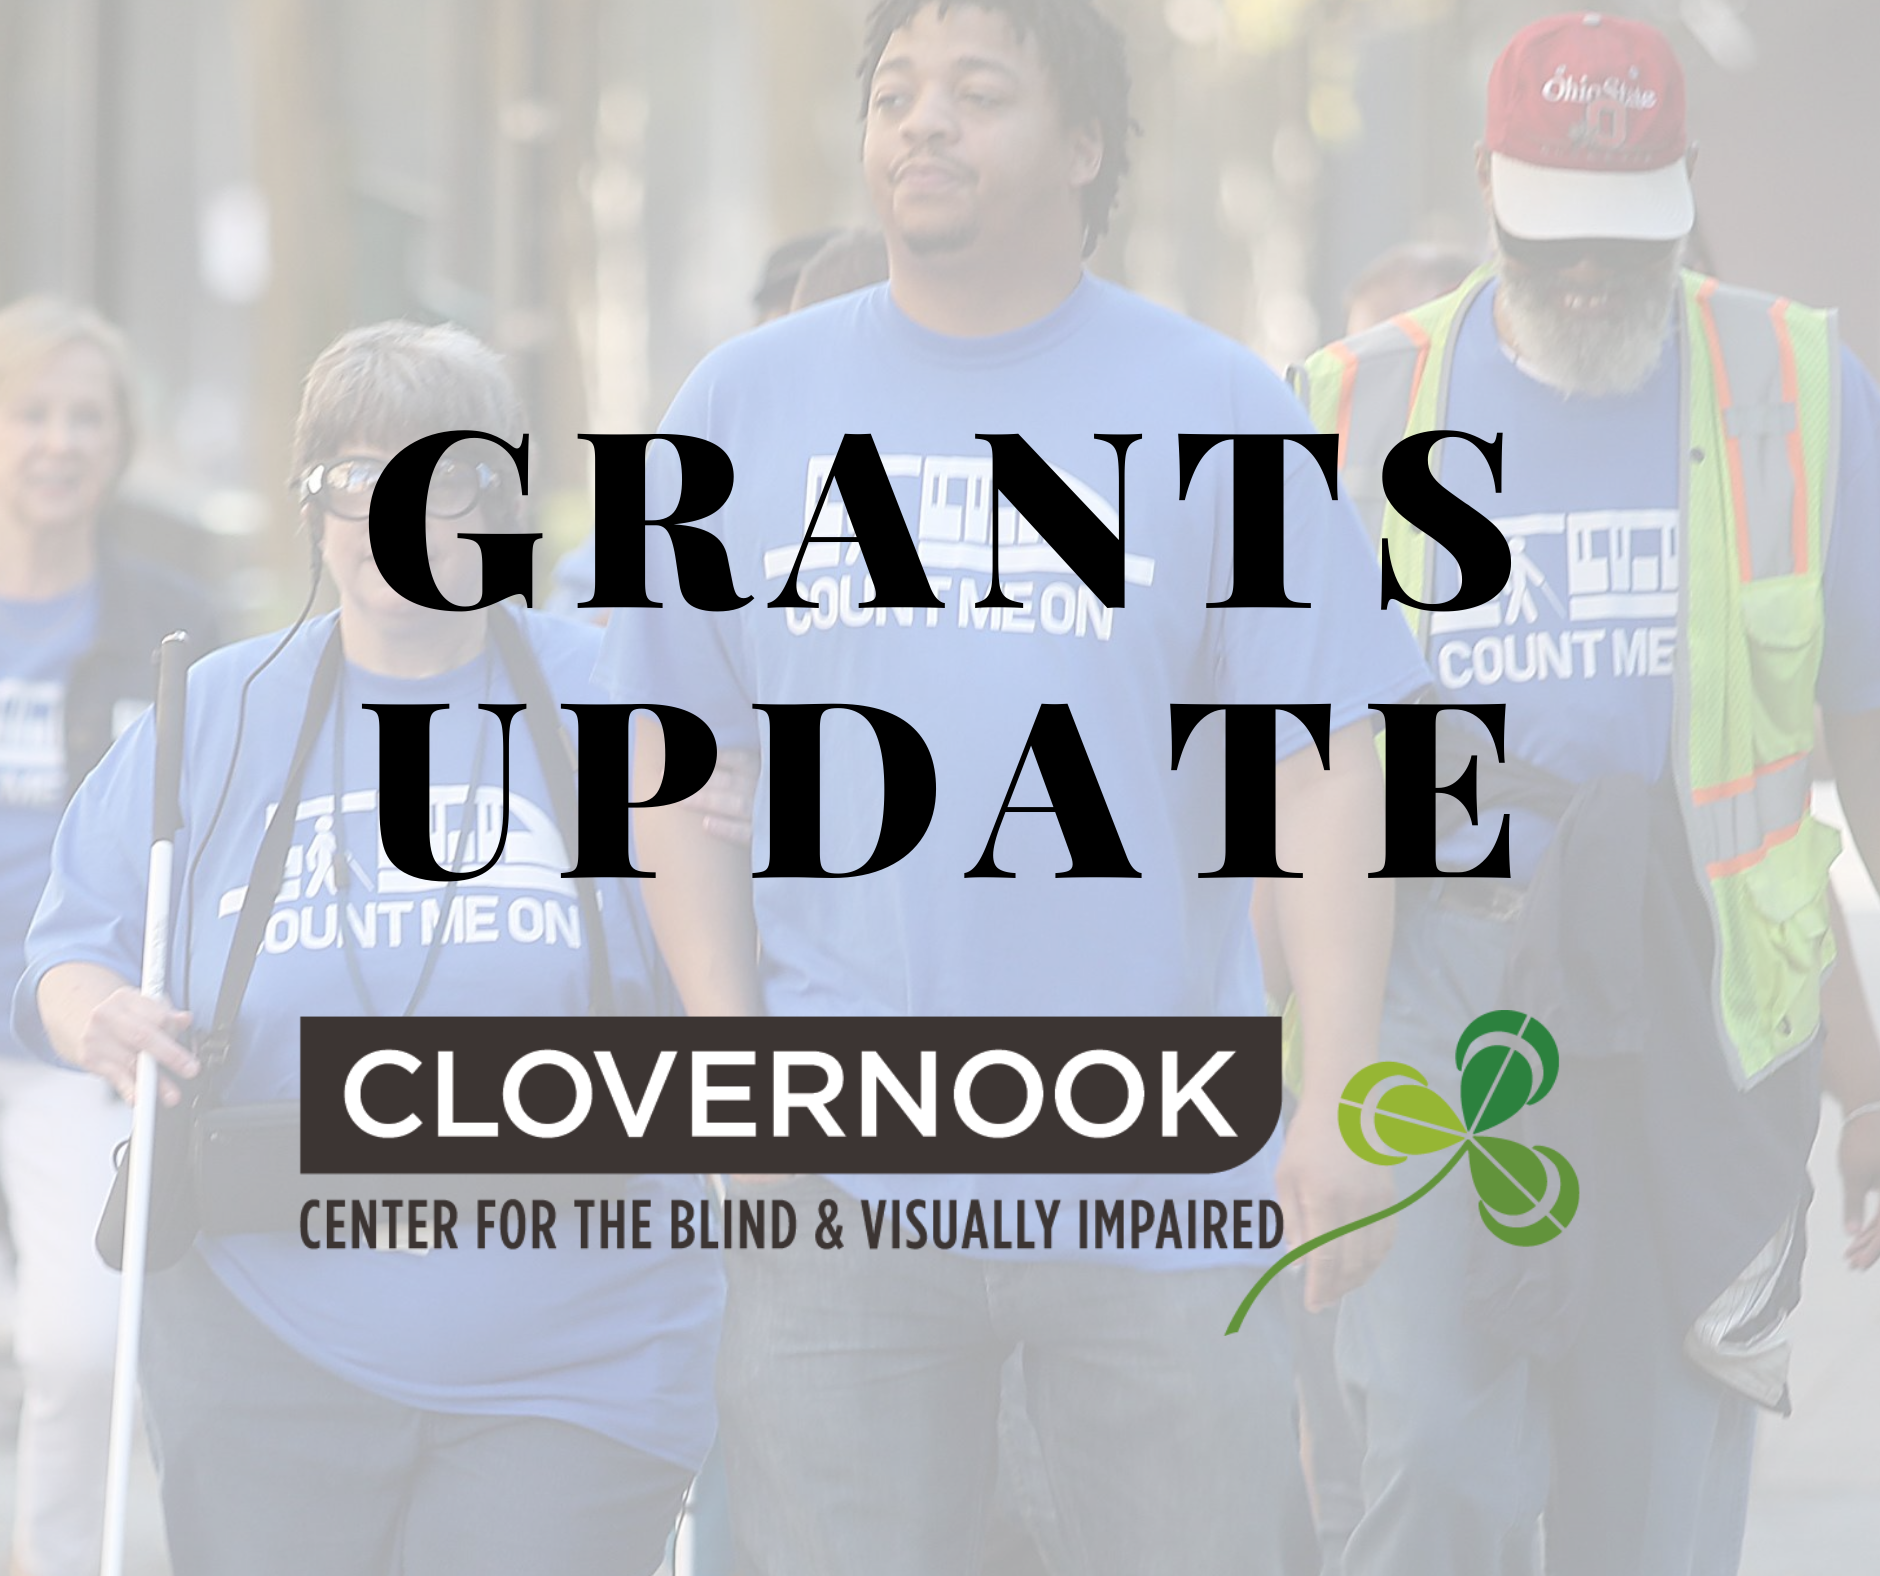 Graphic that says "Grants Update" with the Clovernook Center logo